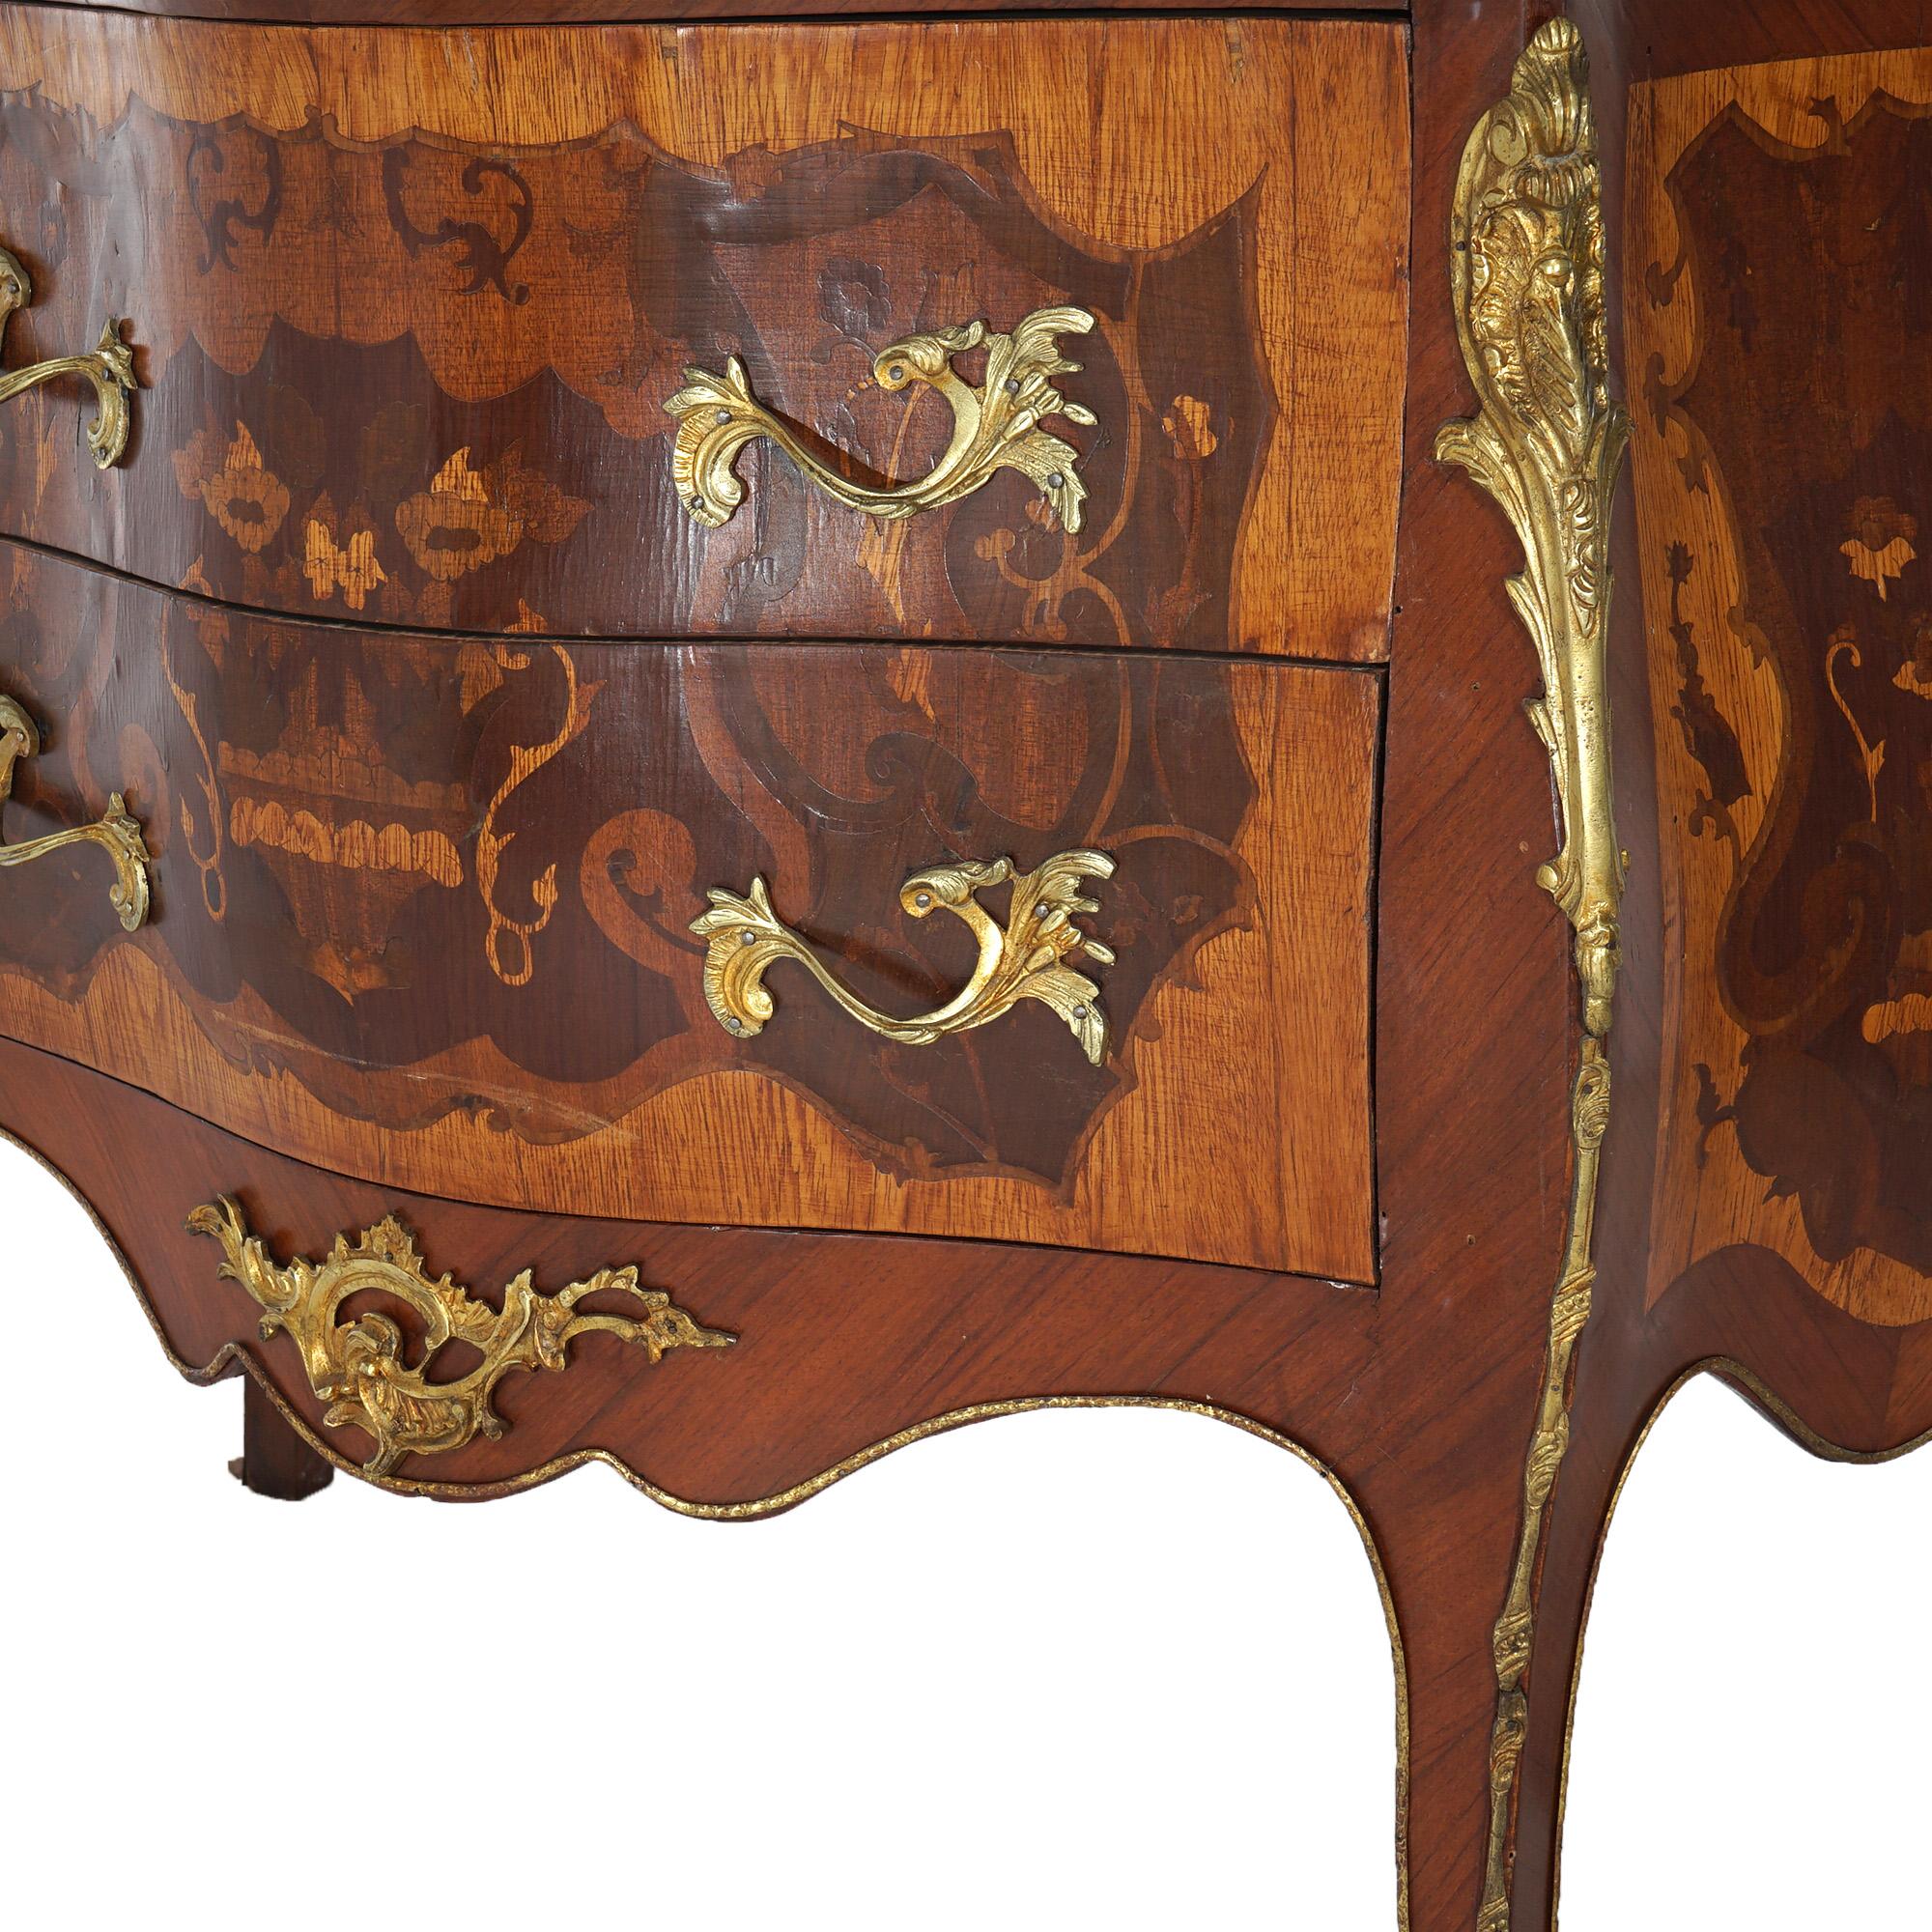 Antique Louis XV Style Marble, Ormolu, Satinwood & Kingwood Inlaid Commode 20thC For Sale 9